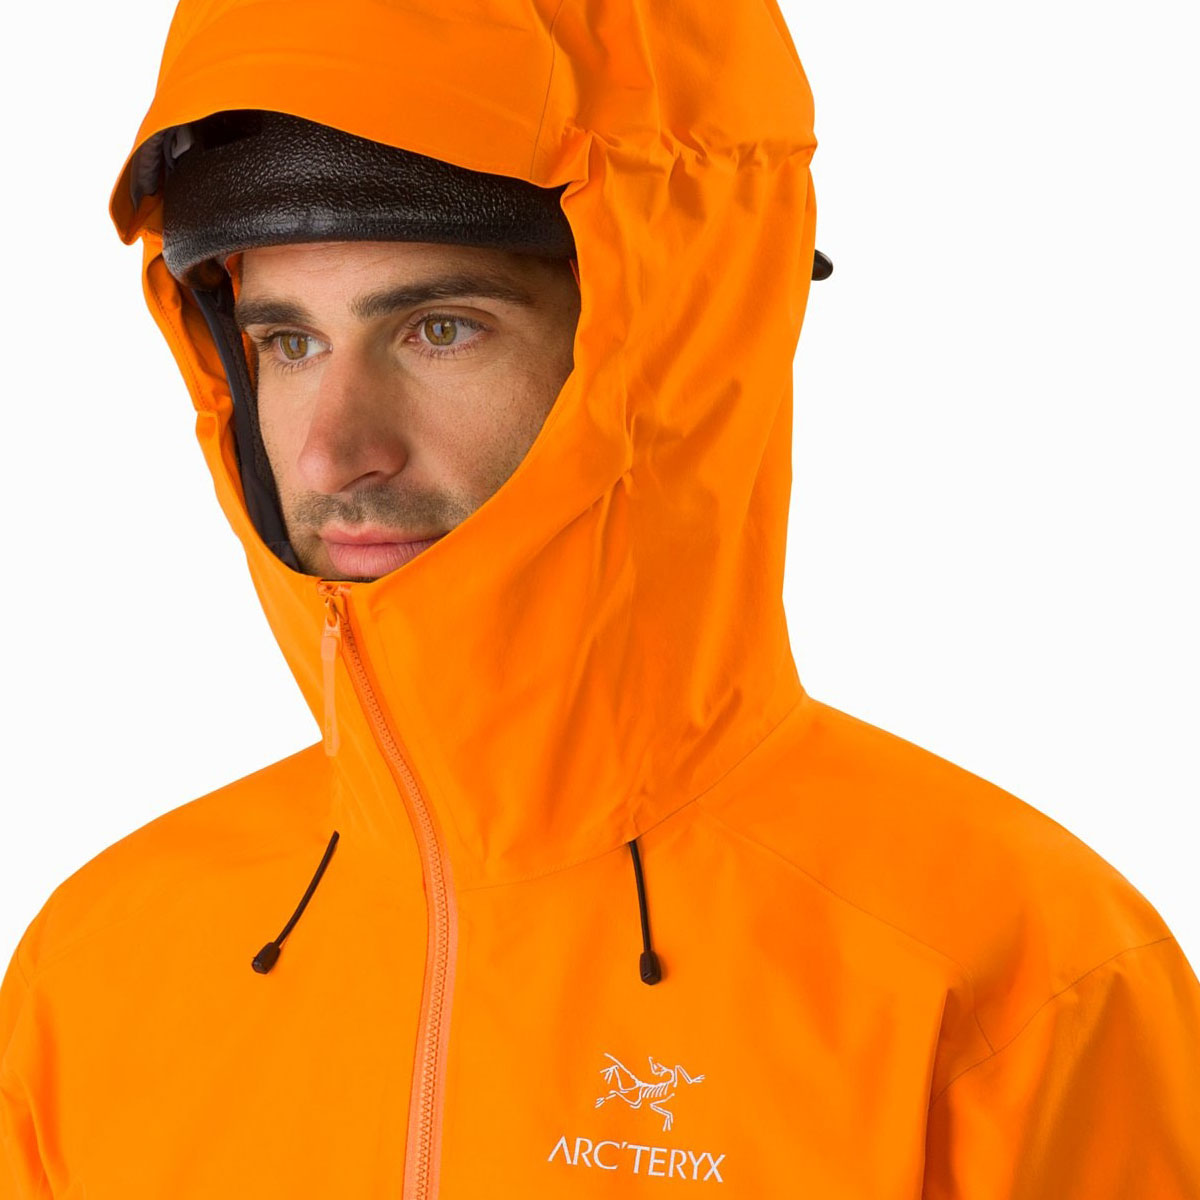 Arc Teryx Alpha Fl Jacket Men S Fall 19 Colors Of Discontinued Model Free Ground Shipping Waterproof Shell Jackets Men S Jackets Clothing Moontrail